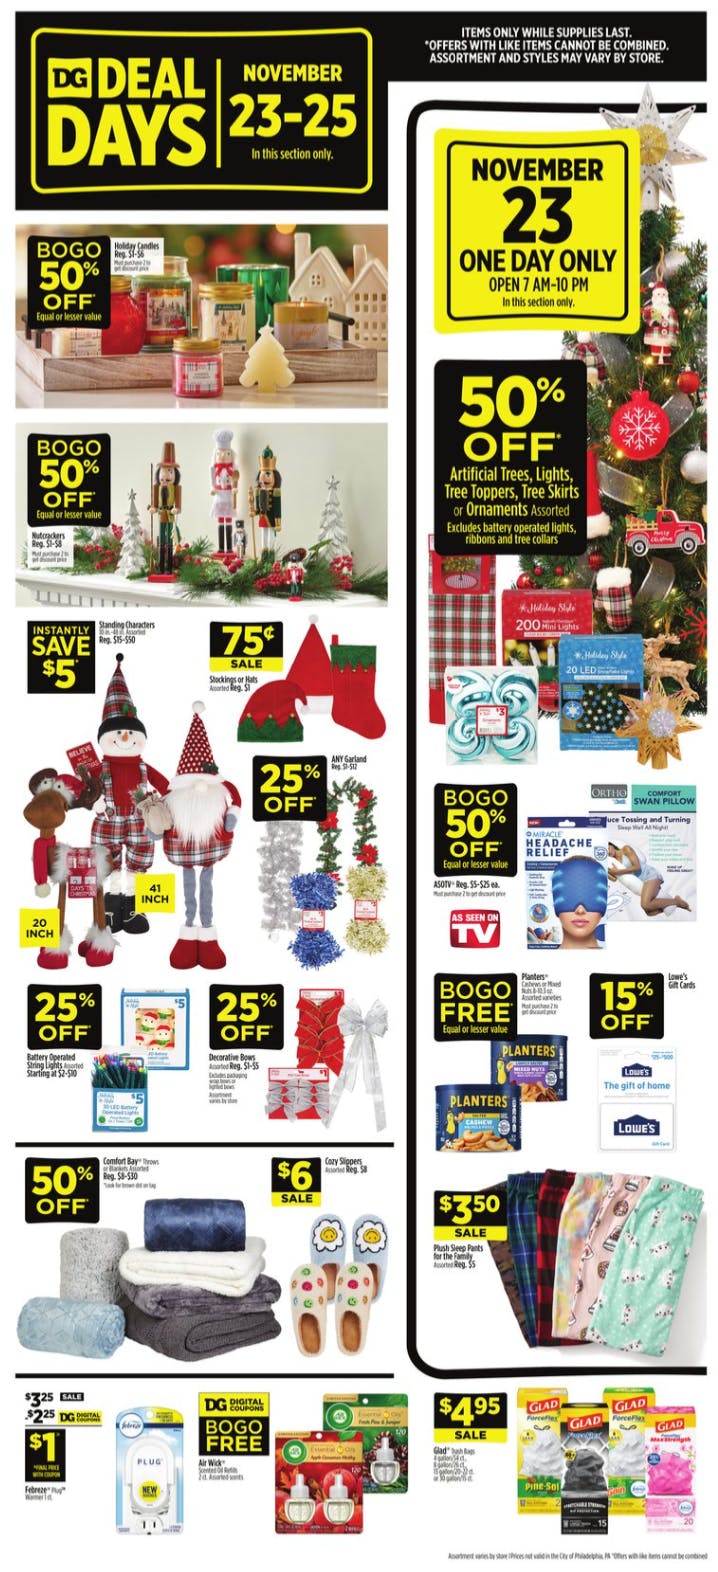 https://prod-cdn-thekrazycouponlady.imgix.net/wp-content/uploads/2021/11/dollar-general-weekly-ad-4-1700409987-1700409987.png